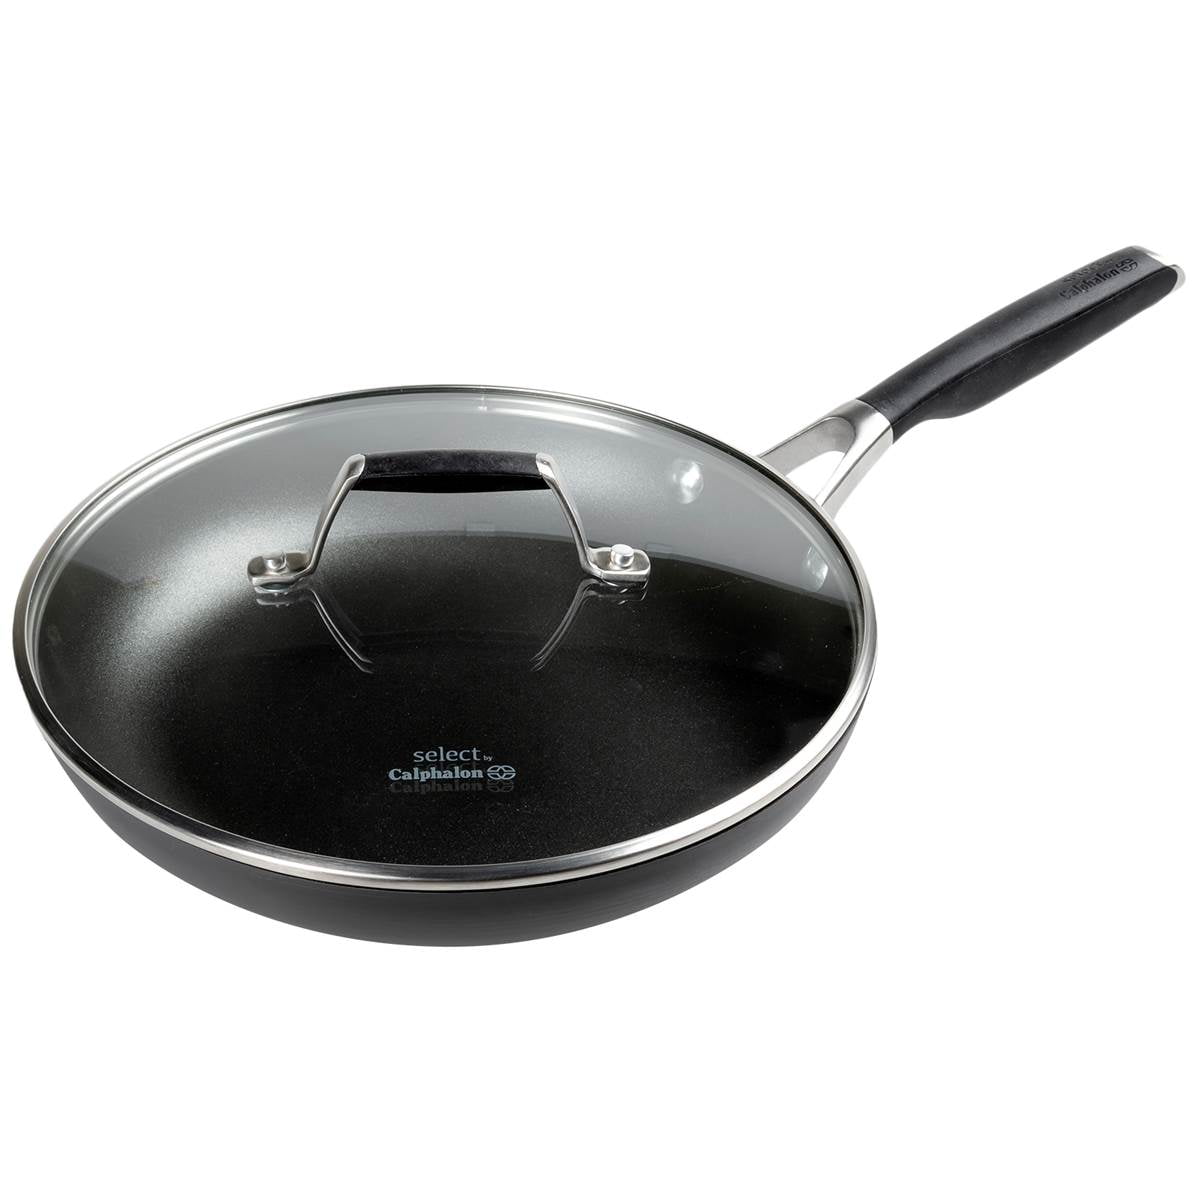 Calphalon Premier Hard-Anodized Nonstick 10-Inch and 12-Inch Fry Pan Set 